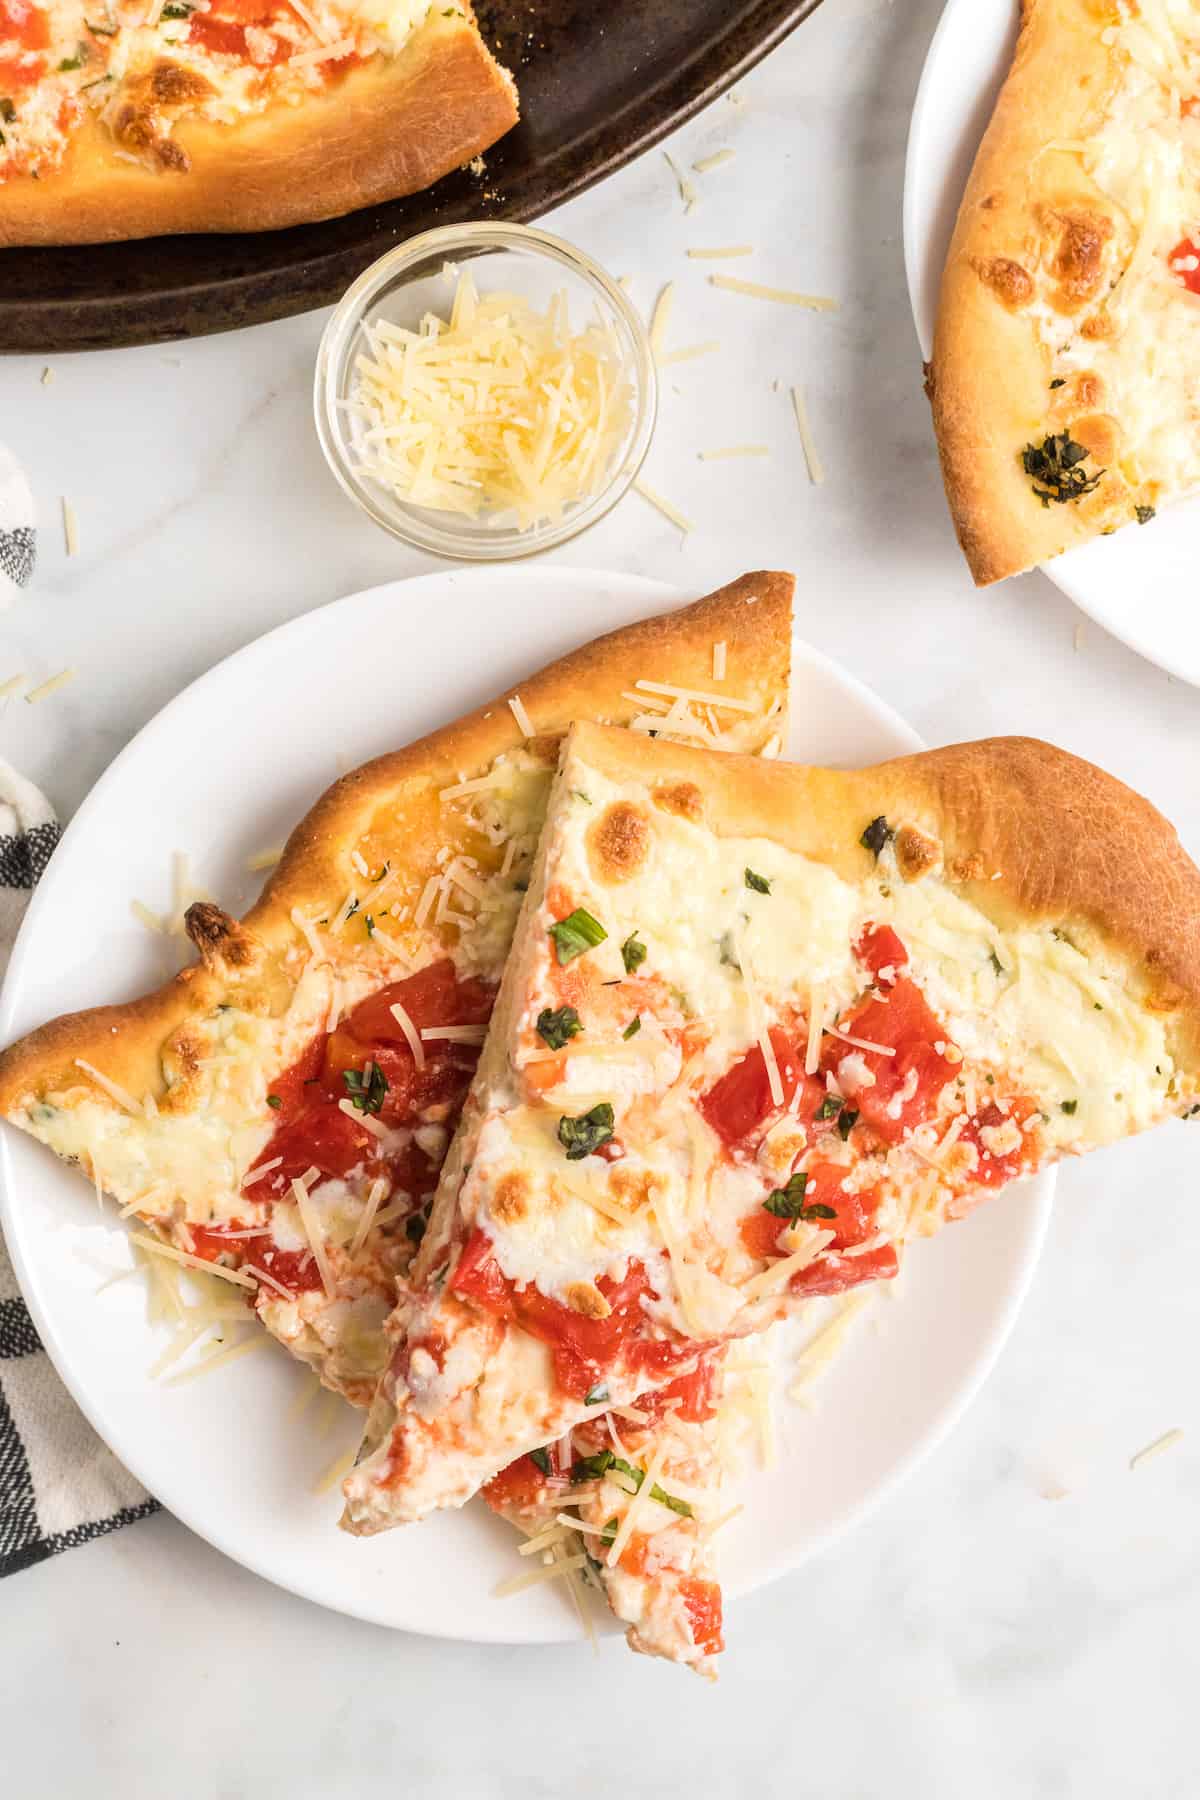 tomato basil and ricotta pizza slices on a white plate